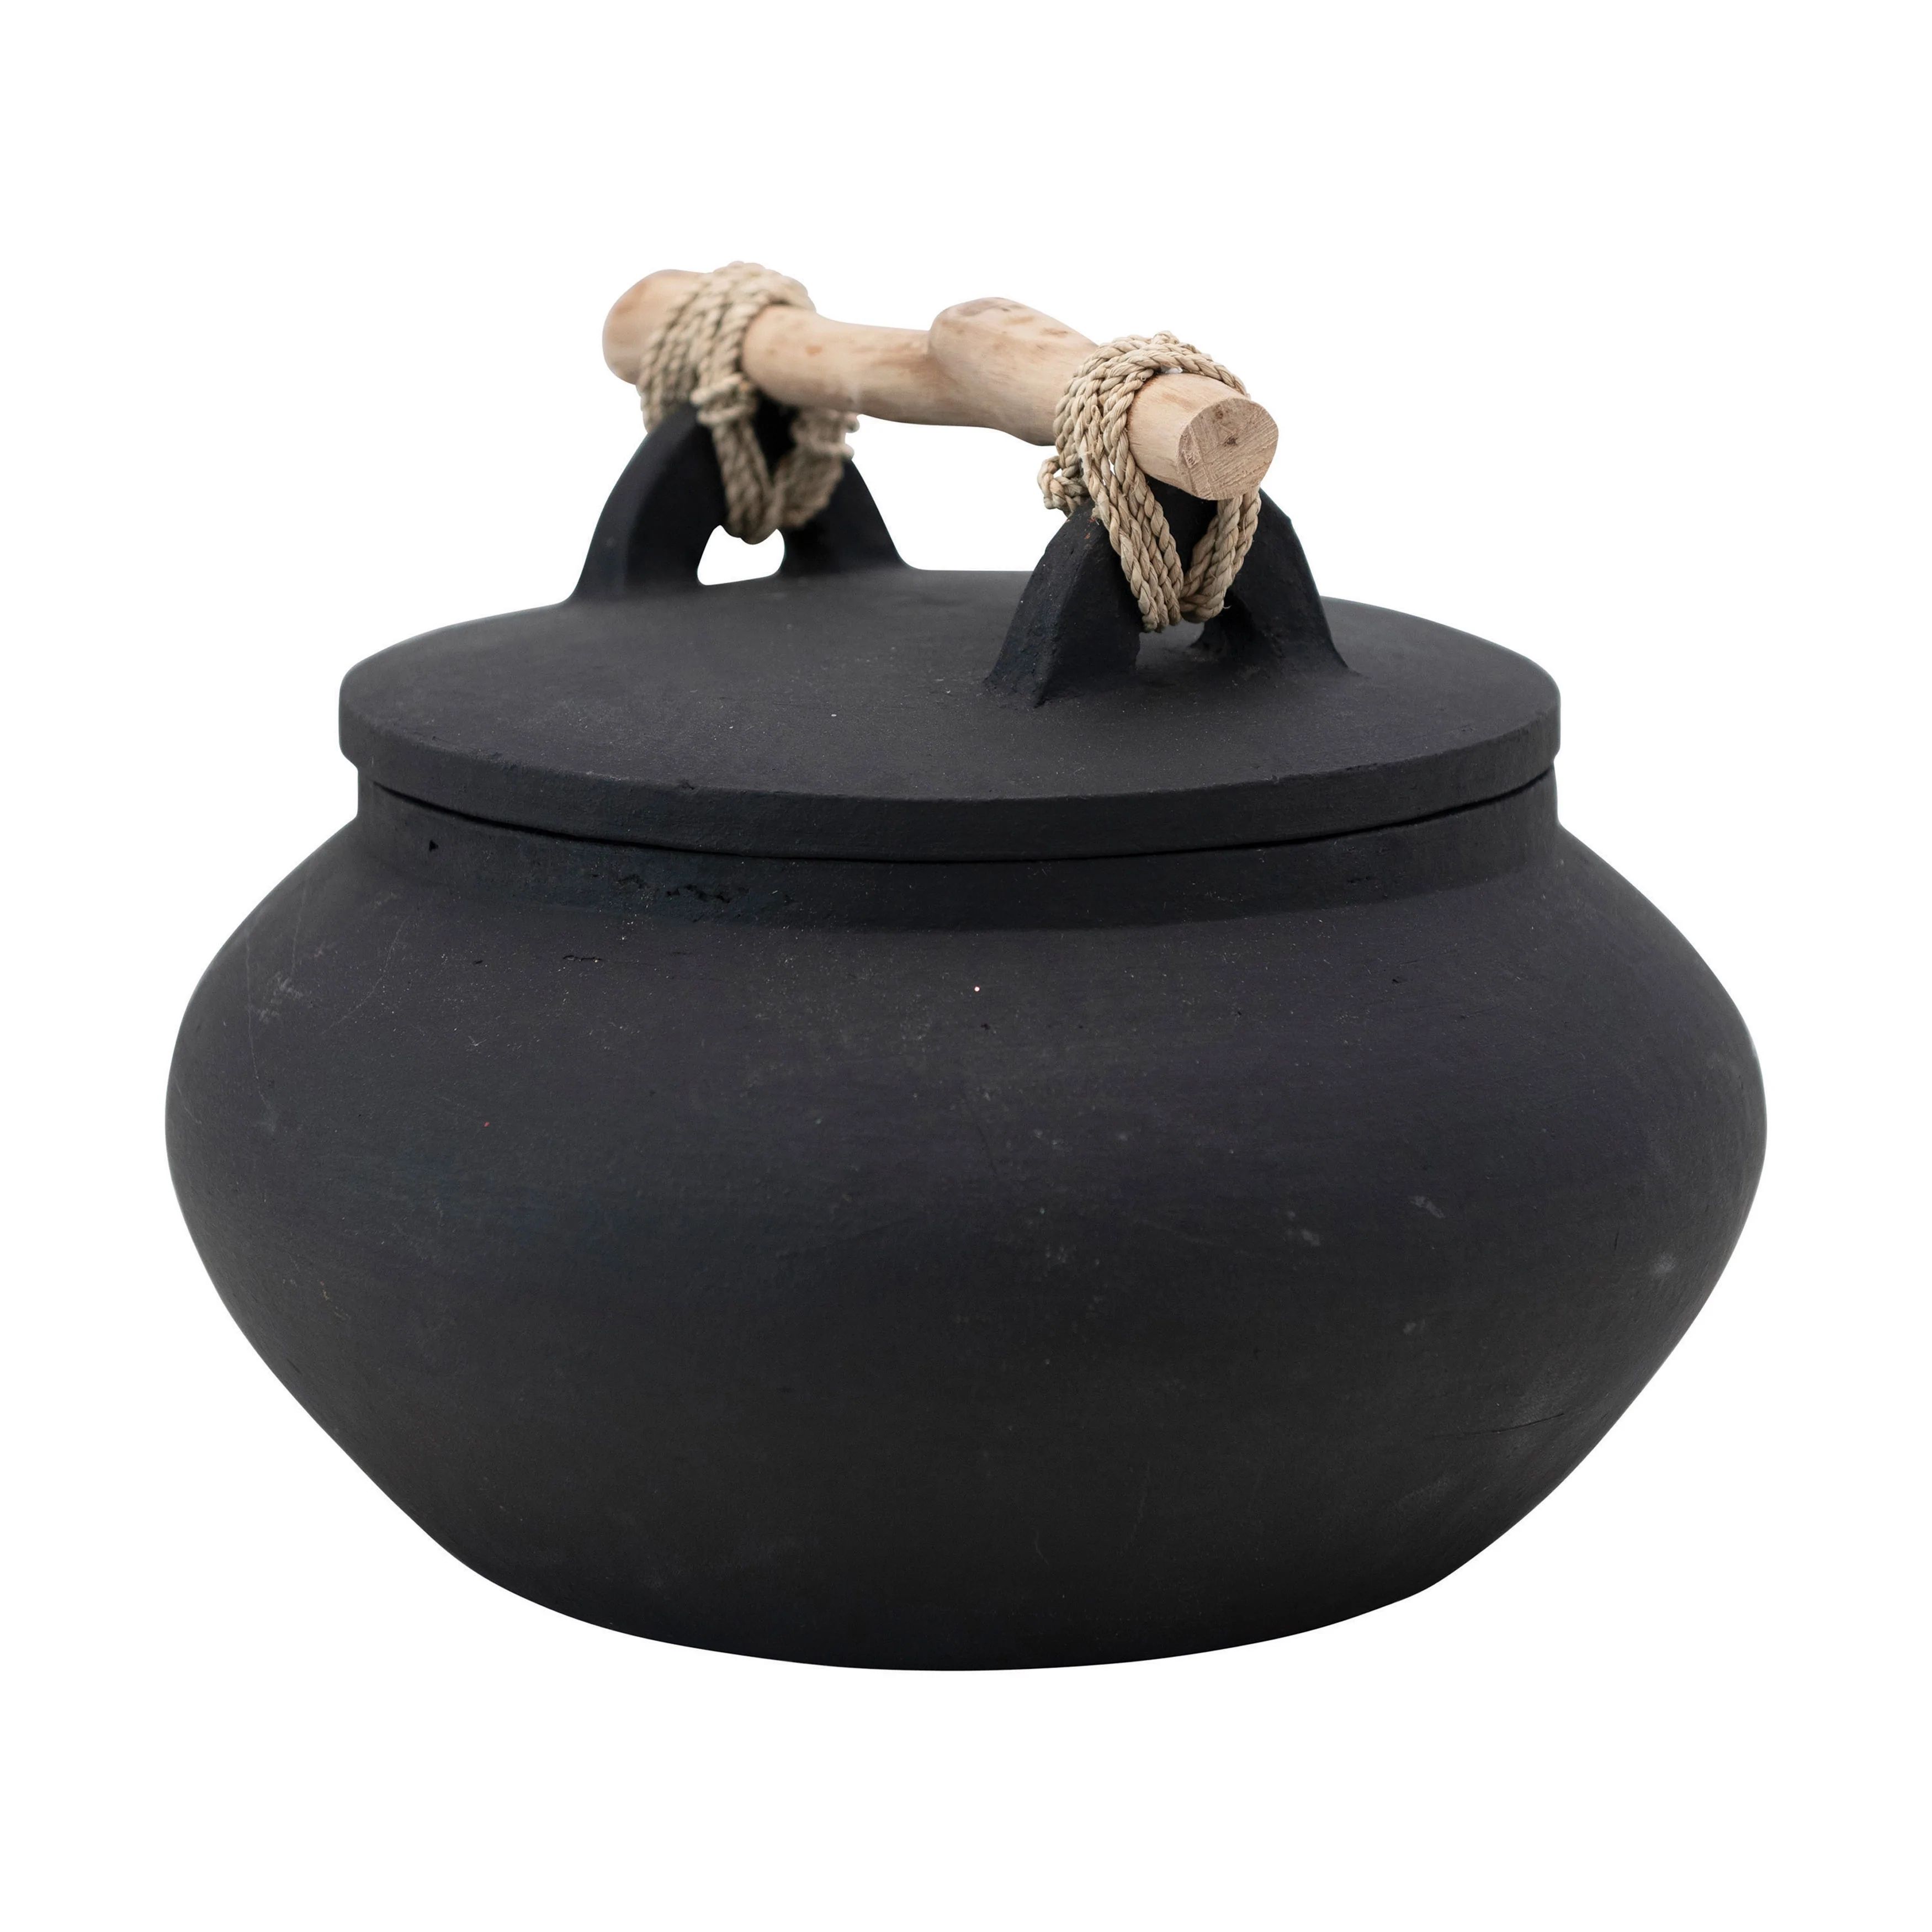 Decorative Terracotta Container w/ Driftwood Handle | Philomena and Co.